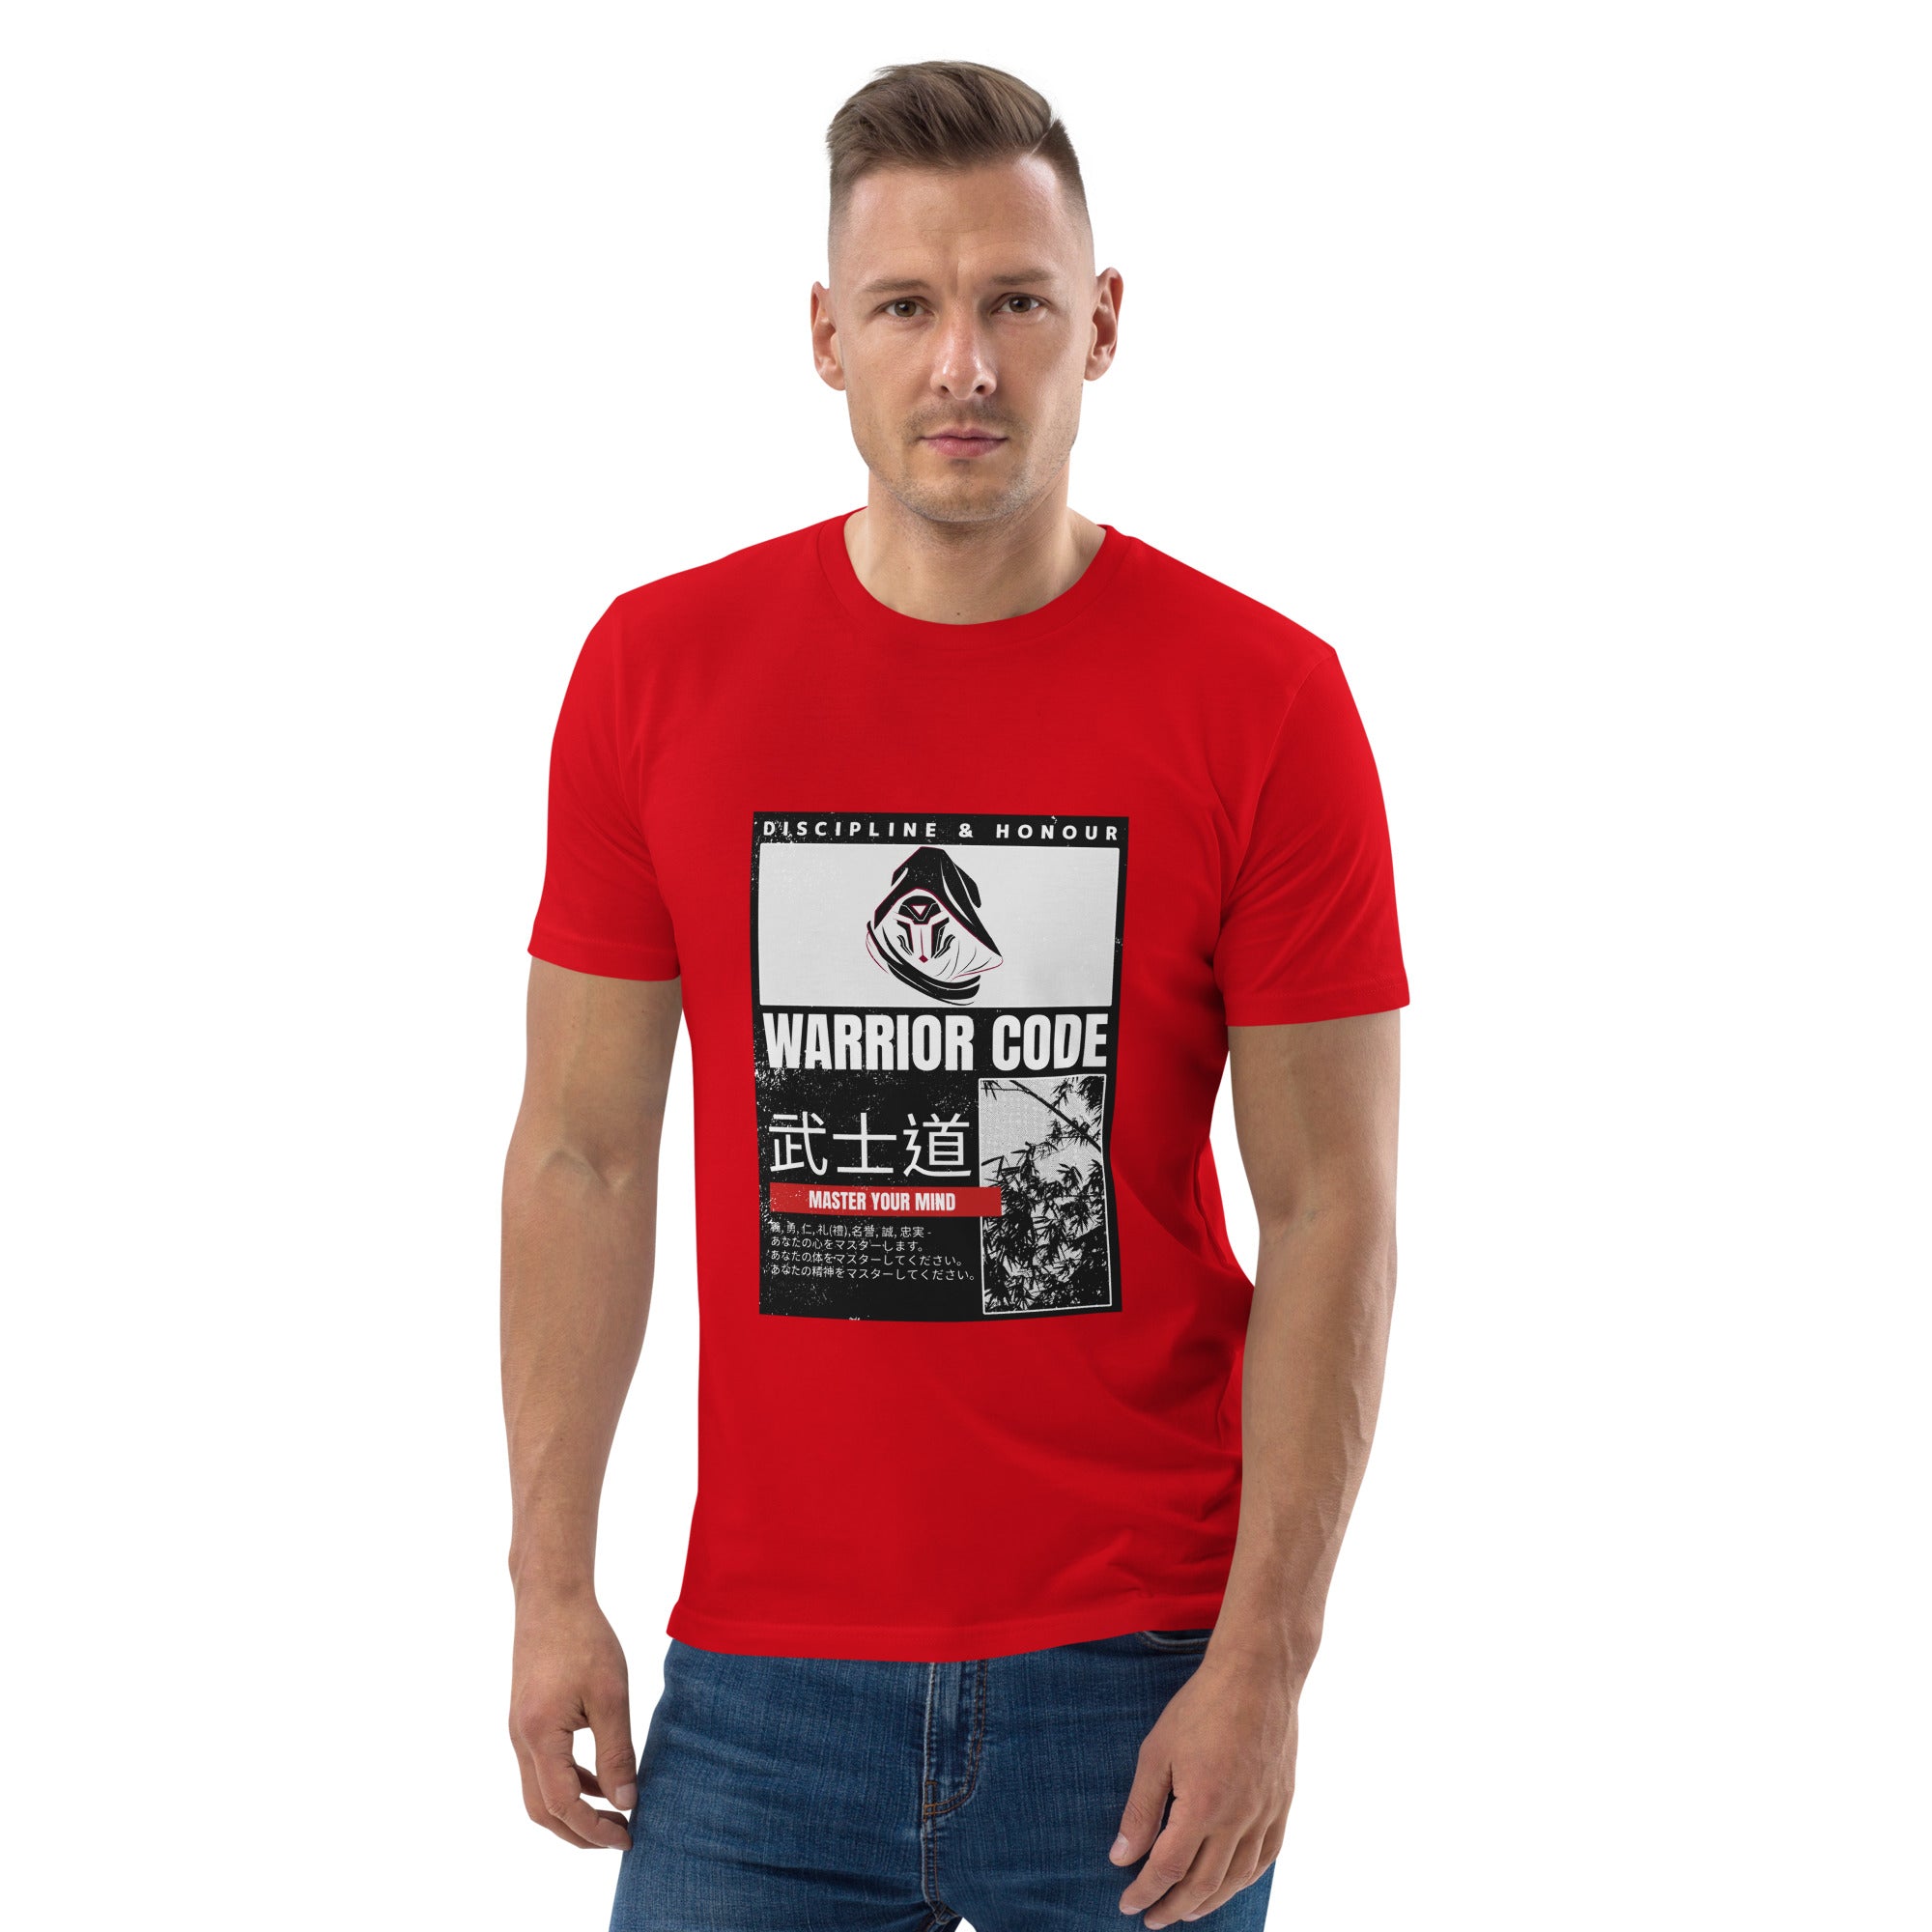 Obey the Code - Unisex organic cotton t-shirt